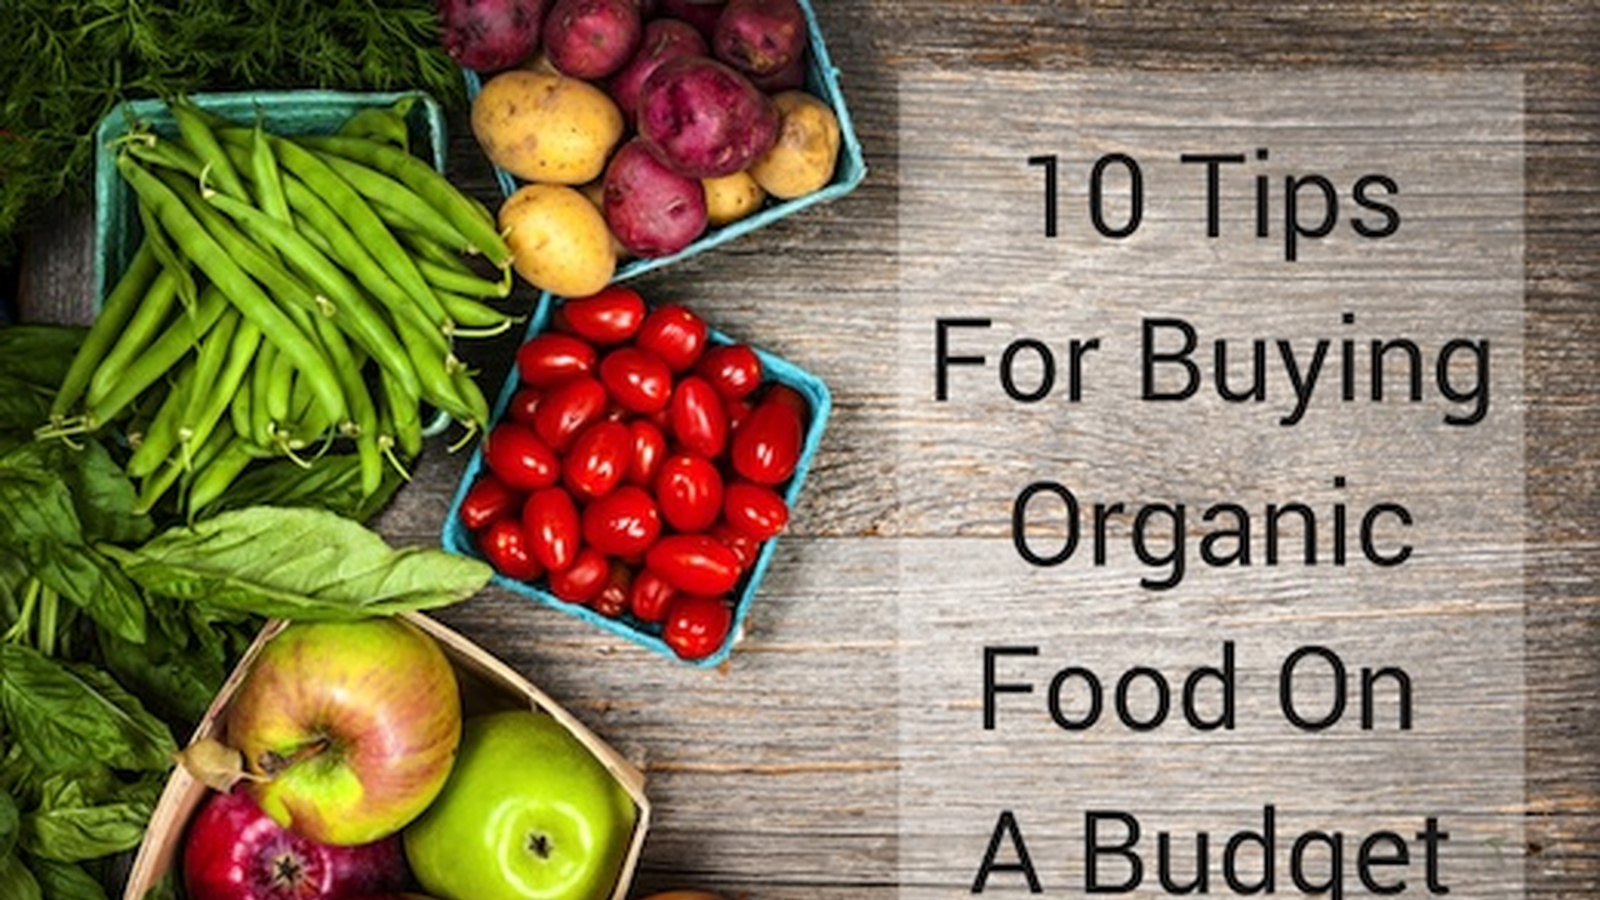 10 Tips for Buying Organic Food on a Budget